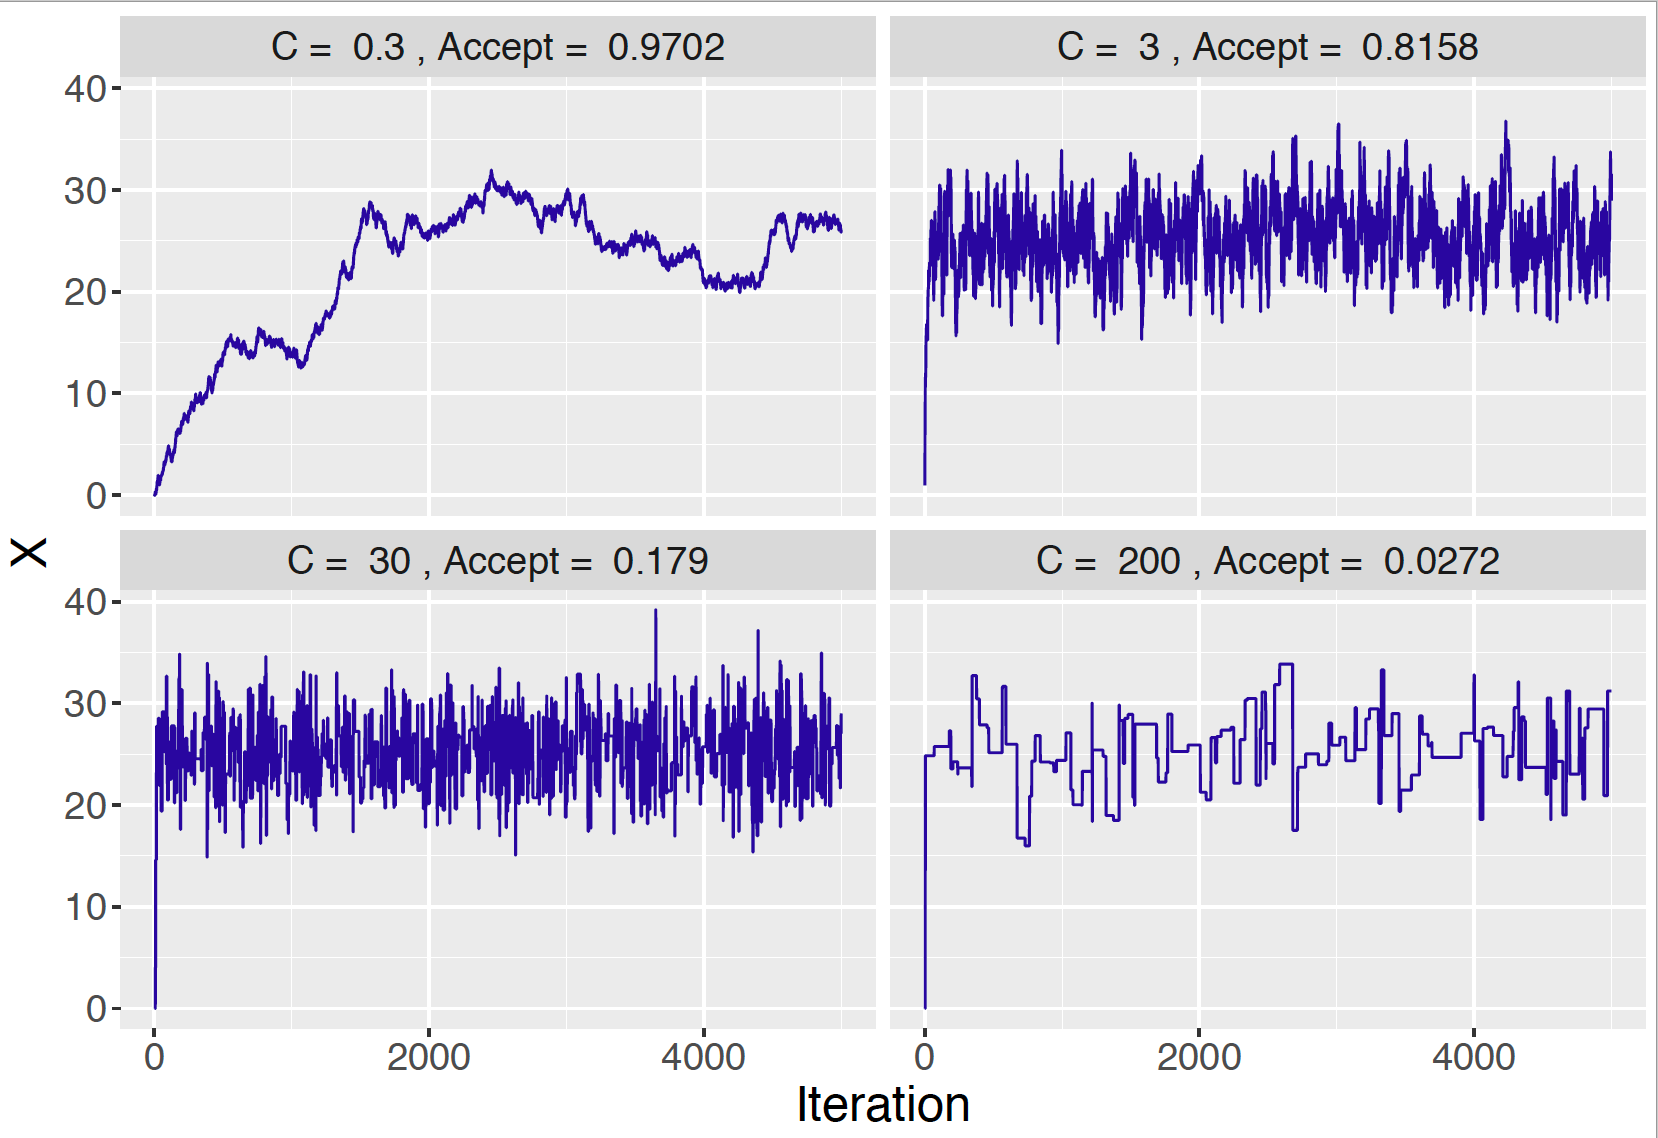 Trace plots of simulated draws using different choices of the constant $C$.